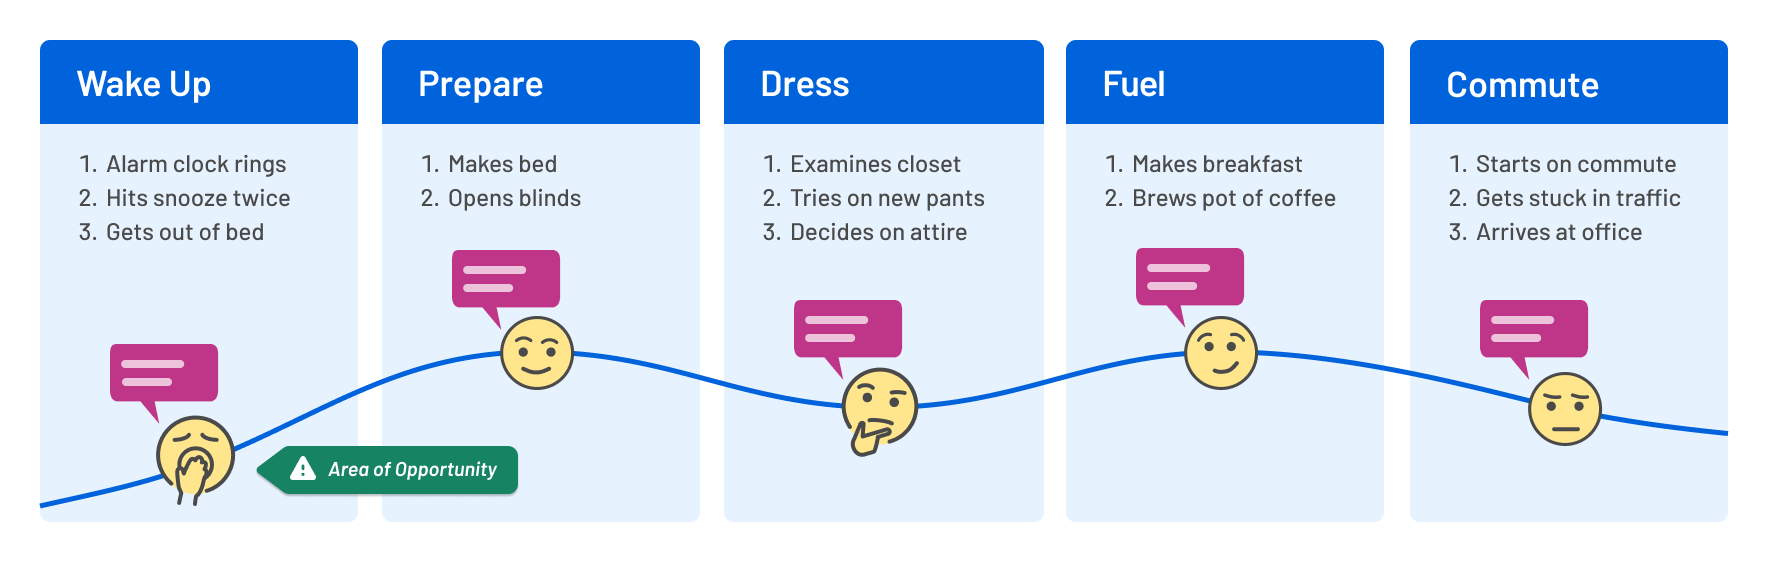 User journey map showing the actions and feelings of someone getting ready for work